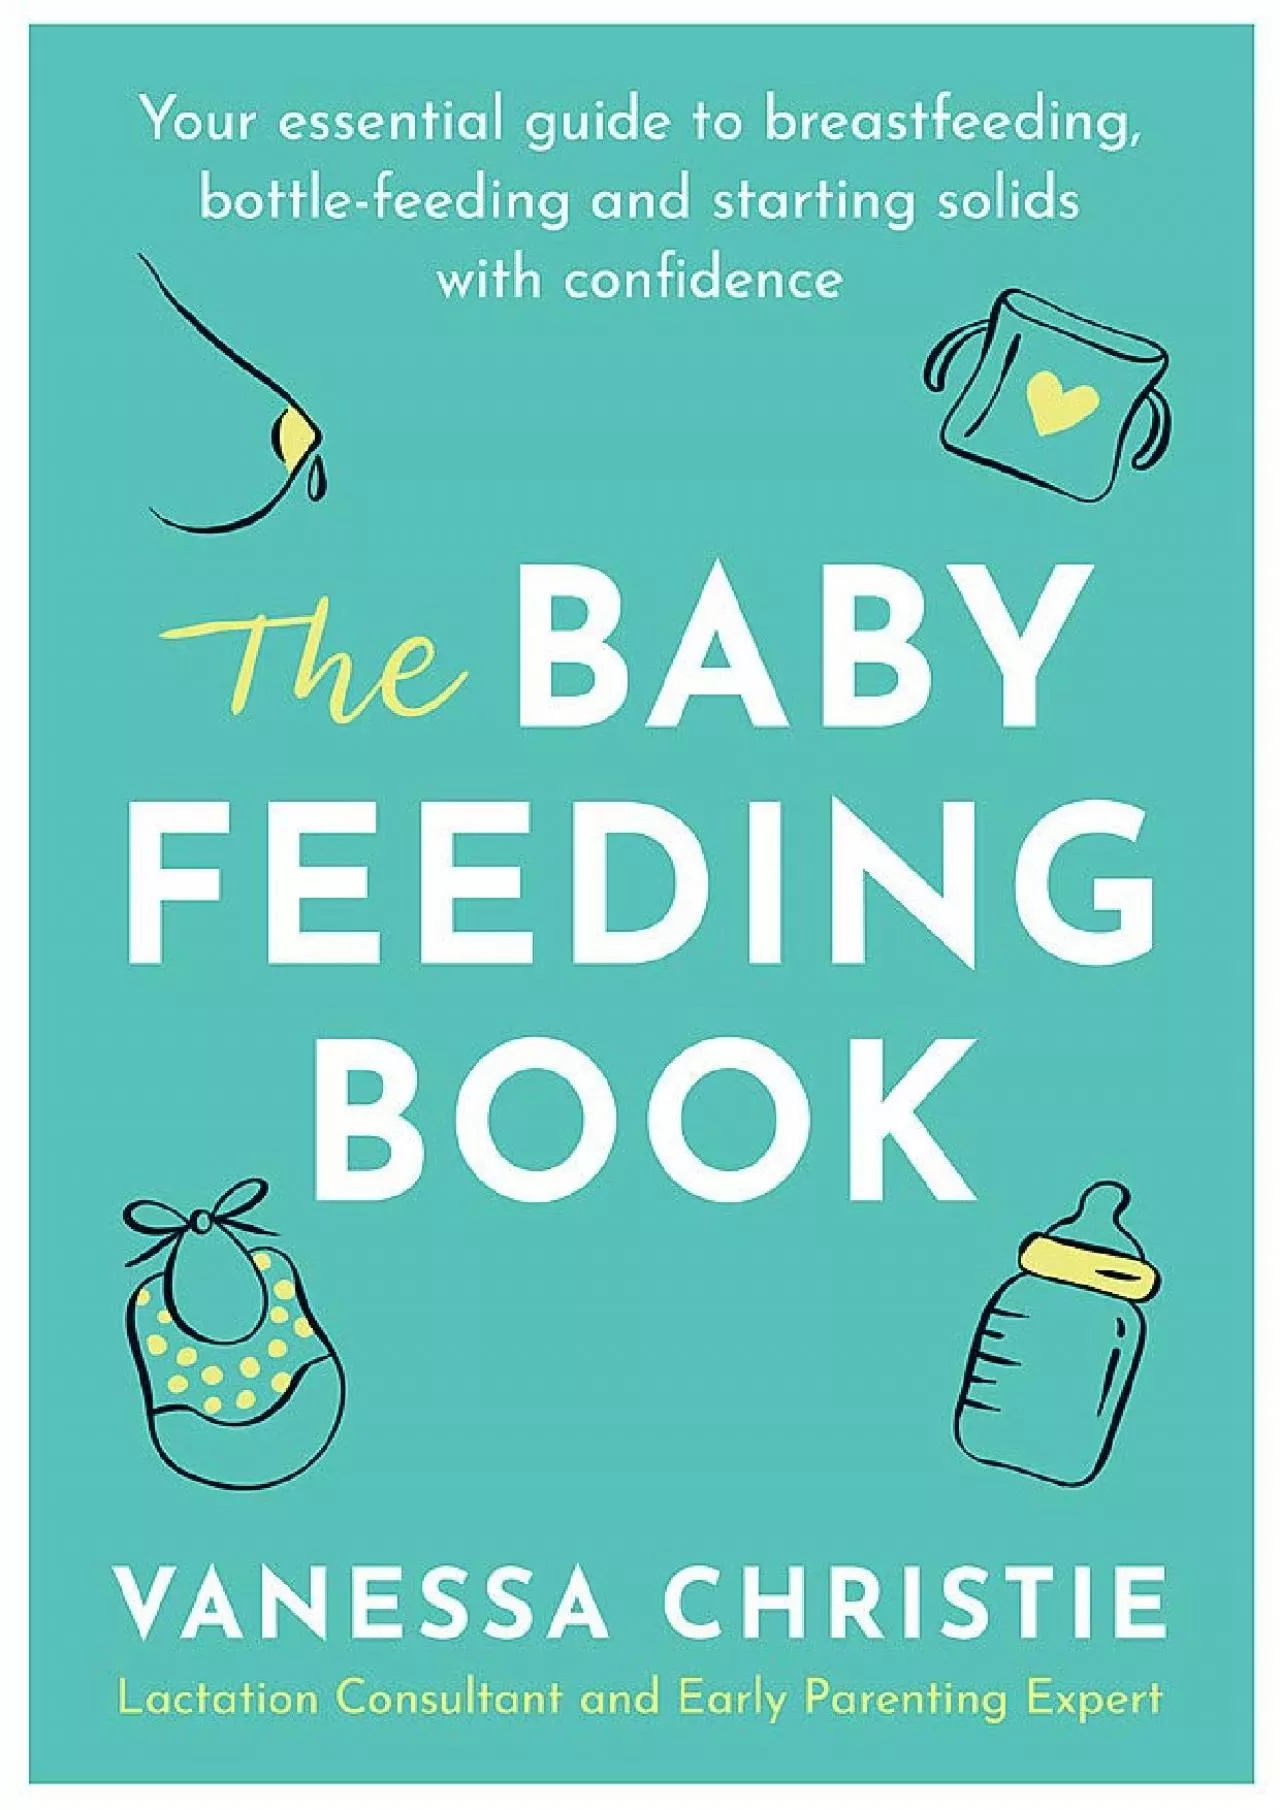 (EBOOK)-The Baby Feeding Book: Your essential guide to breastfeeding, bottle-feeding and